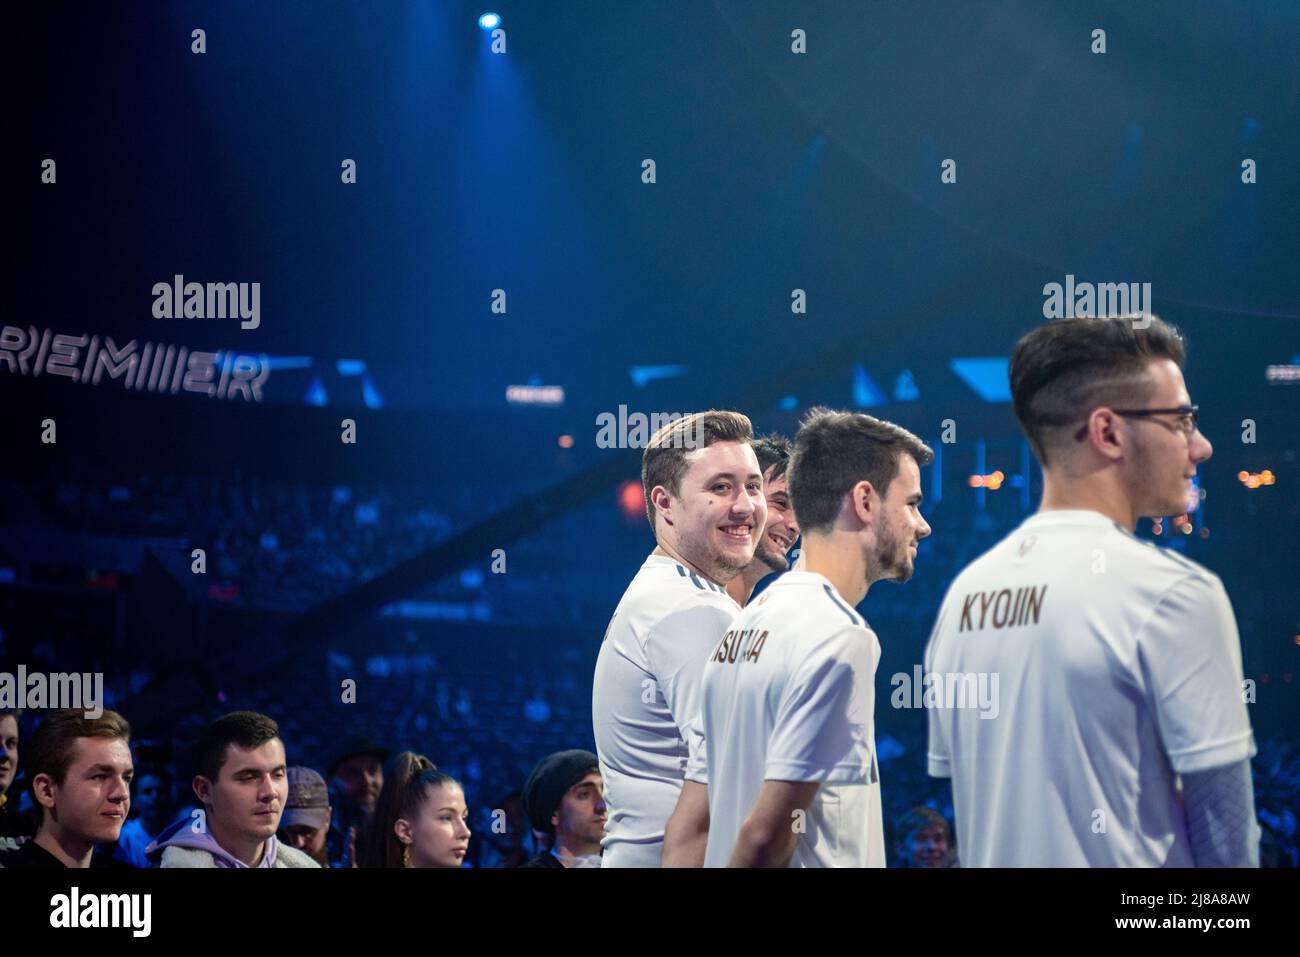 Zywoo on the smaller stage with his team around him. Stock Photo